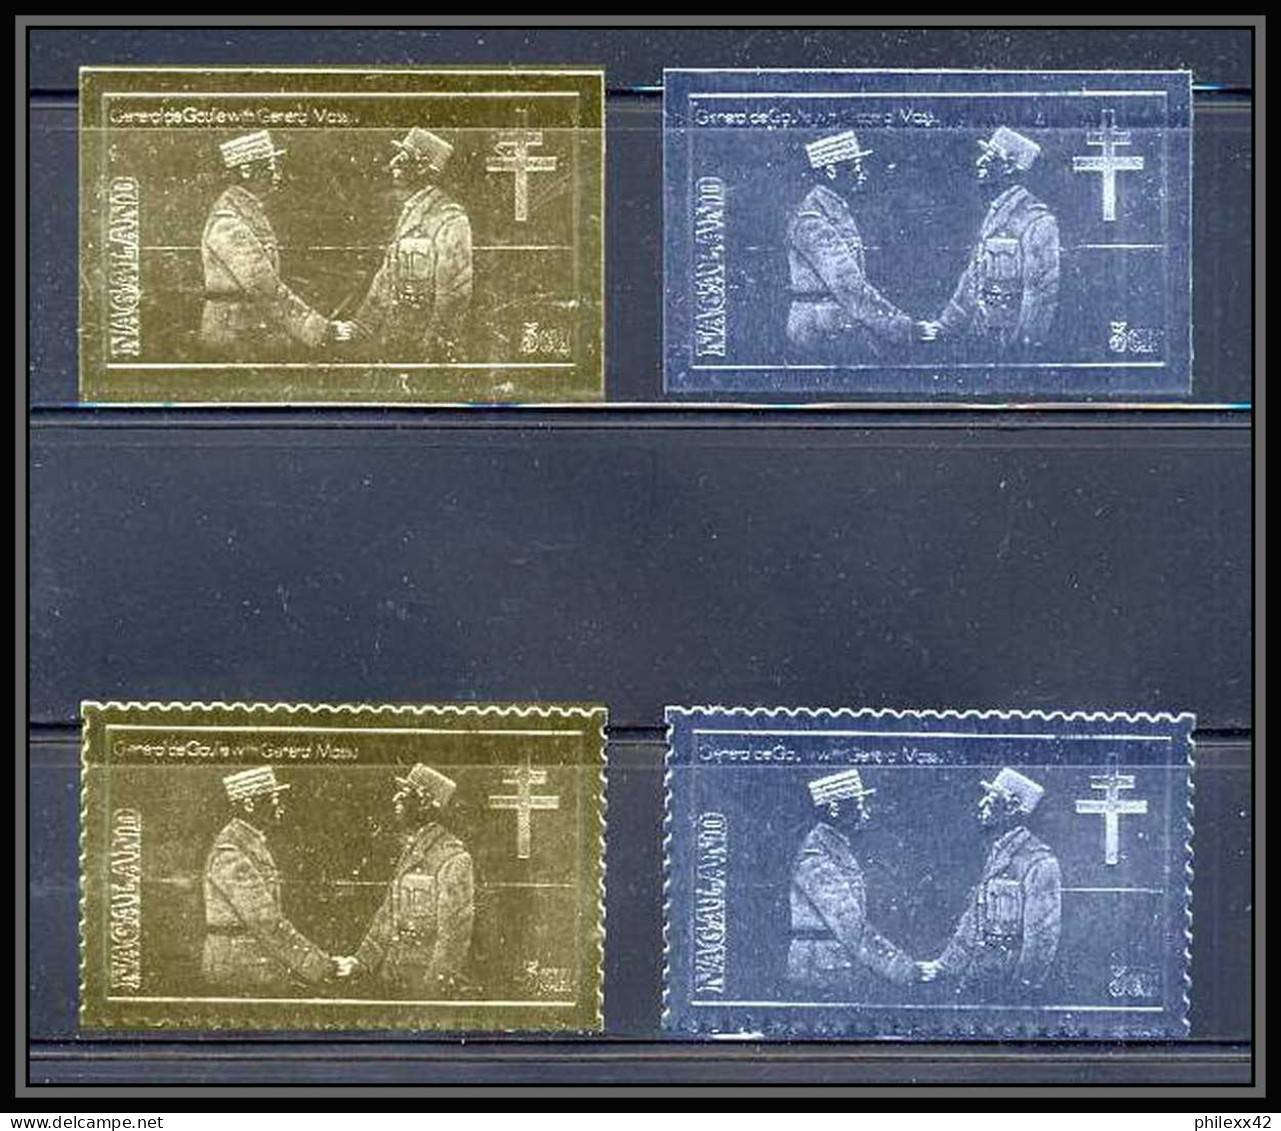 174a Charles De Gaulle - Jacques Massu - Inde (India) 4 Timbres Série Complète Argent (Silver) OR (gold Stamps)  - Emissions Locales